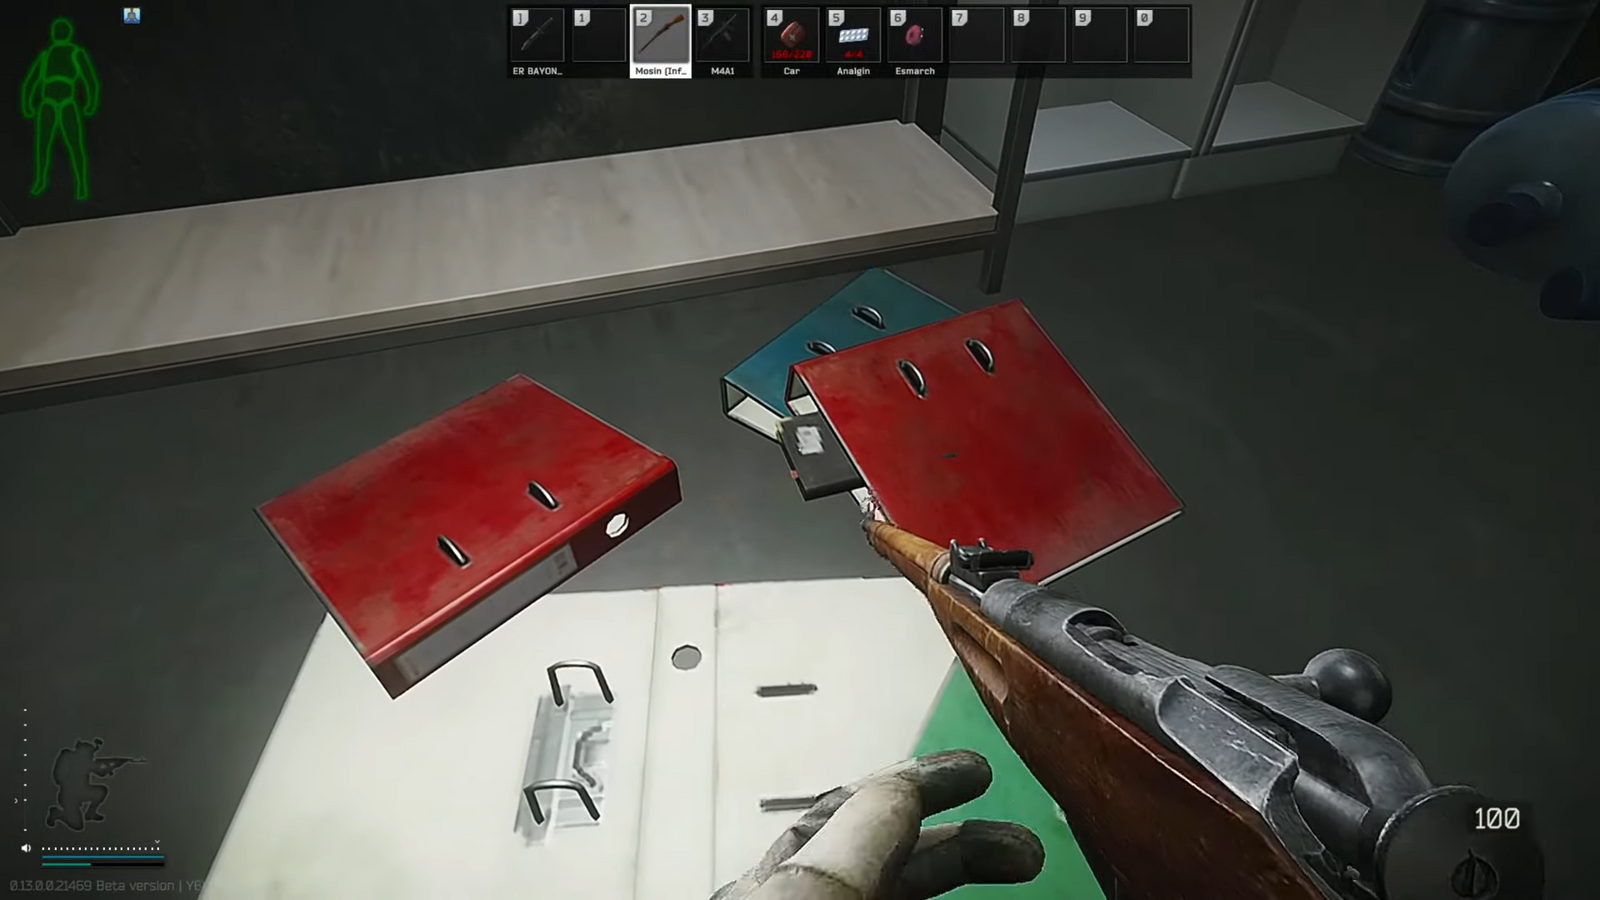 Audit journal between red folders on the floor in Escape from Tarkov.